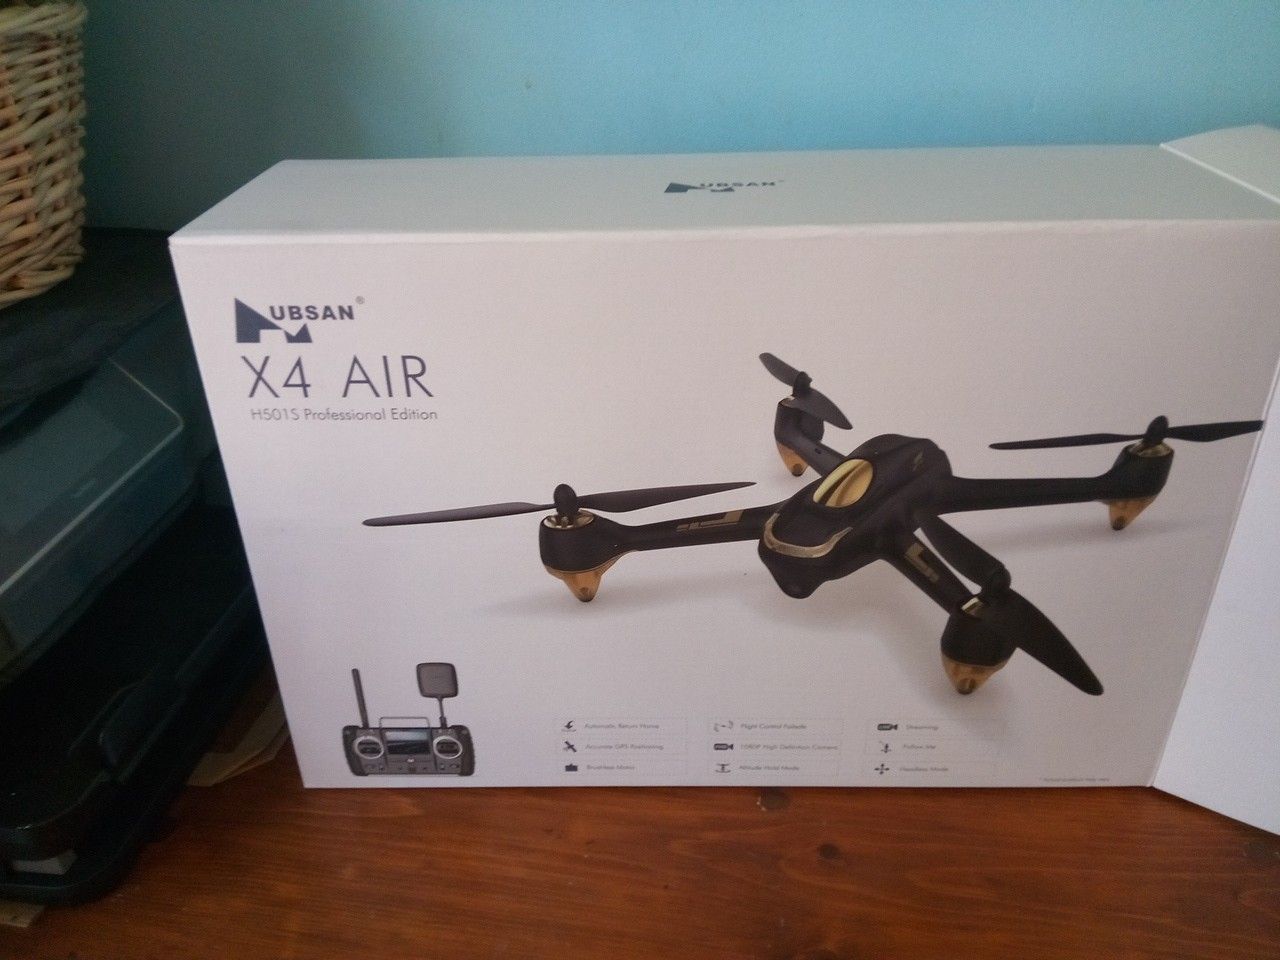 Brand New x4 Air professional edition 1080p highdef drone